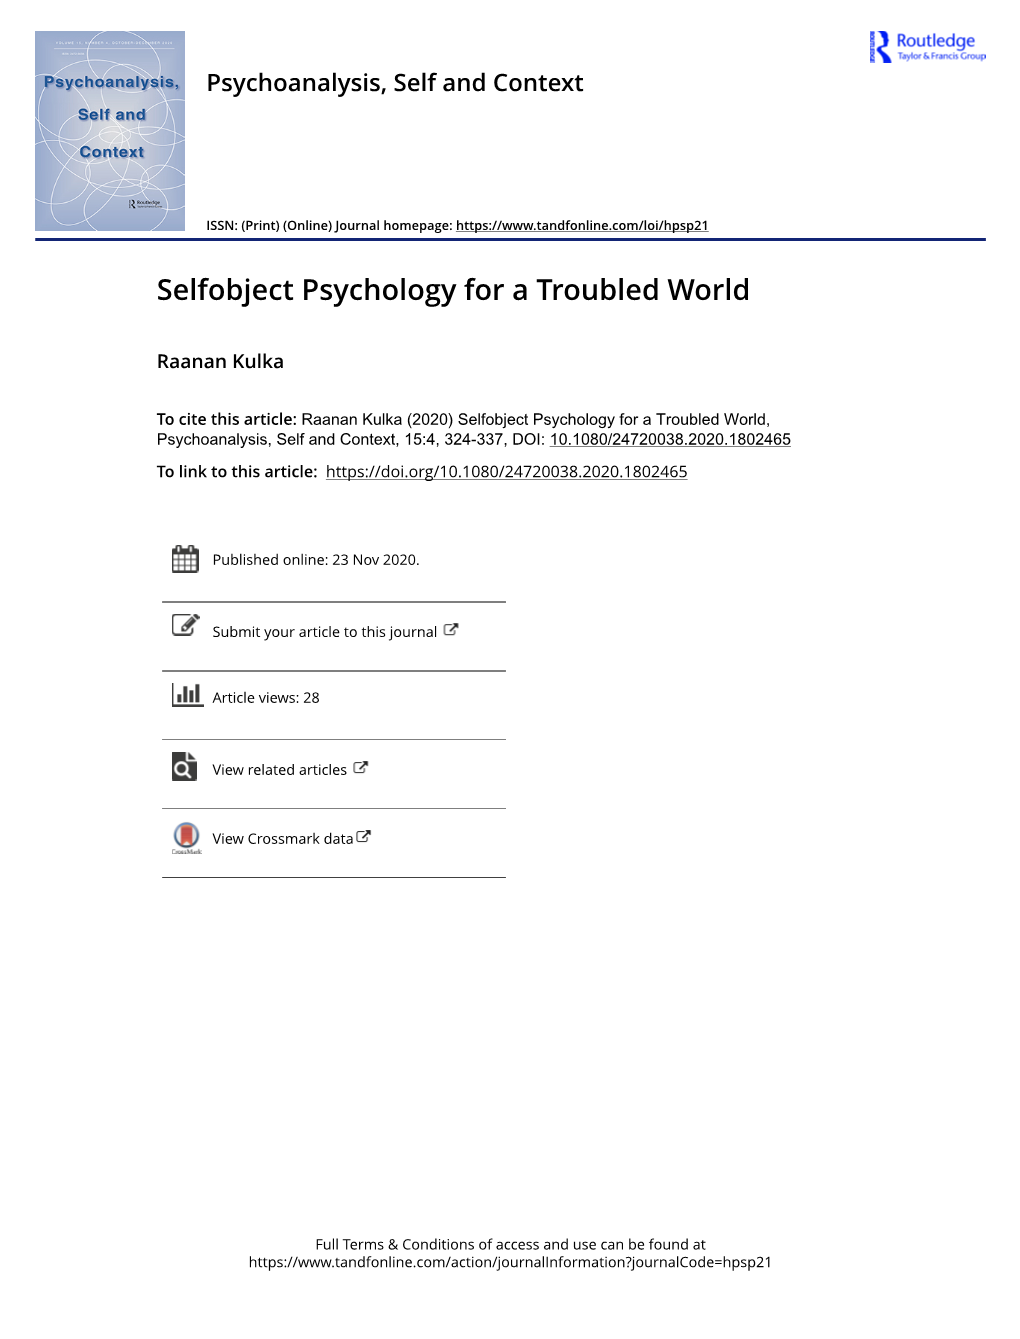 Selfobject Psychology for a Troubled World